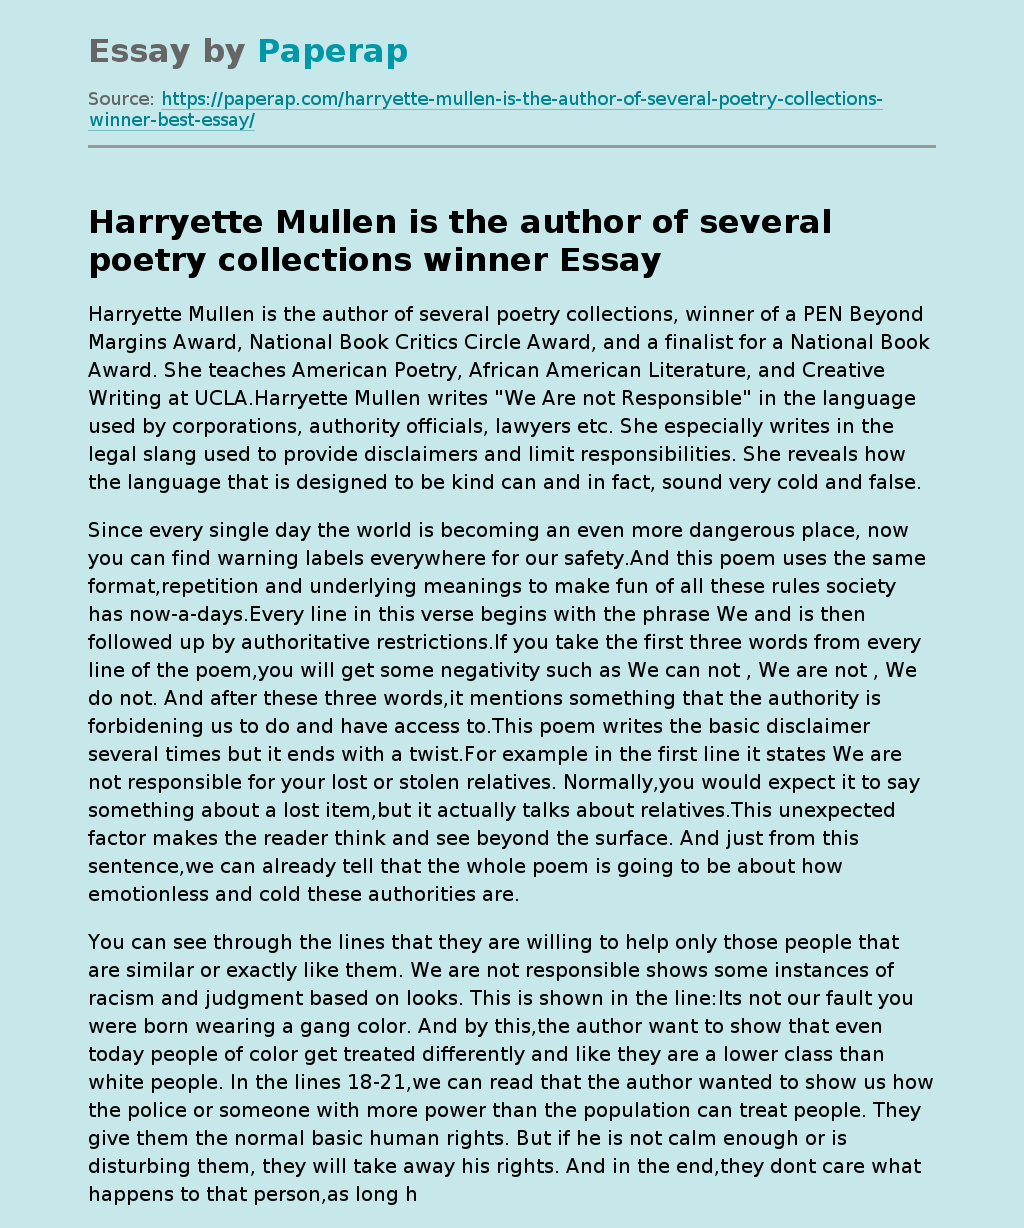 Harryette Mullen is the author of several poetry collections winner